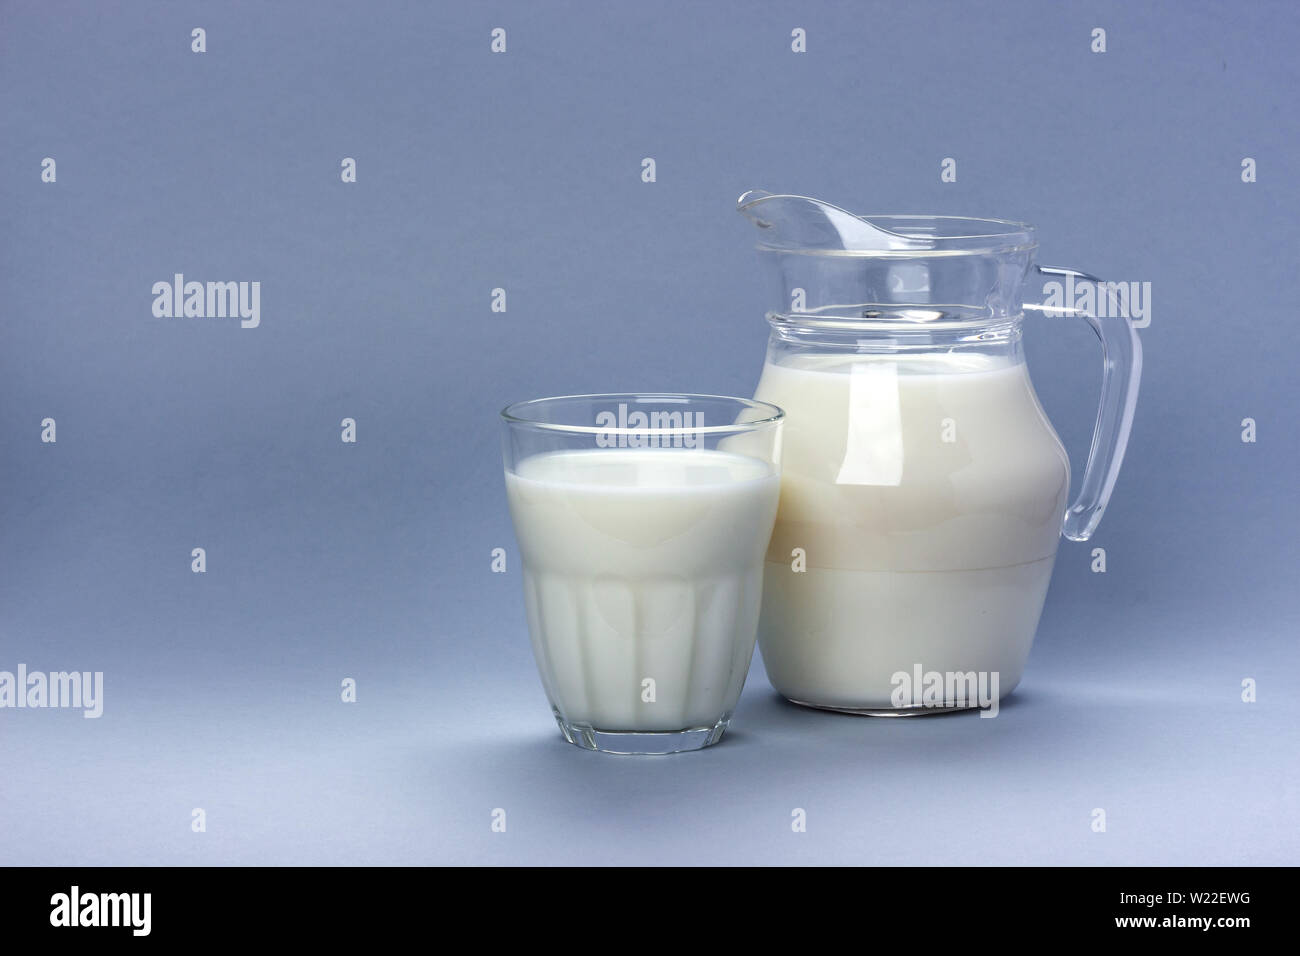 Jar and glass of milk isolated on white background with copy space for text, dairy product concept Stock Photo